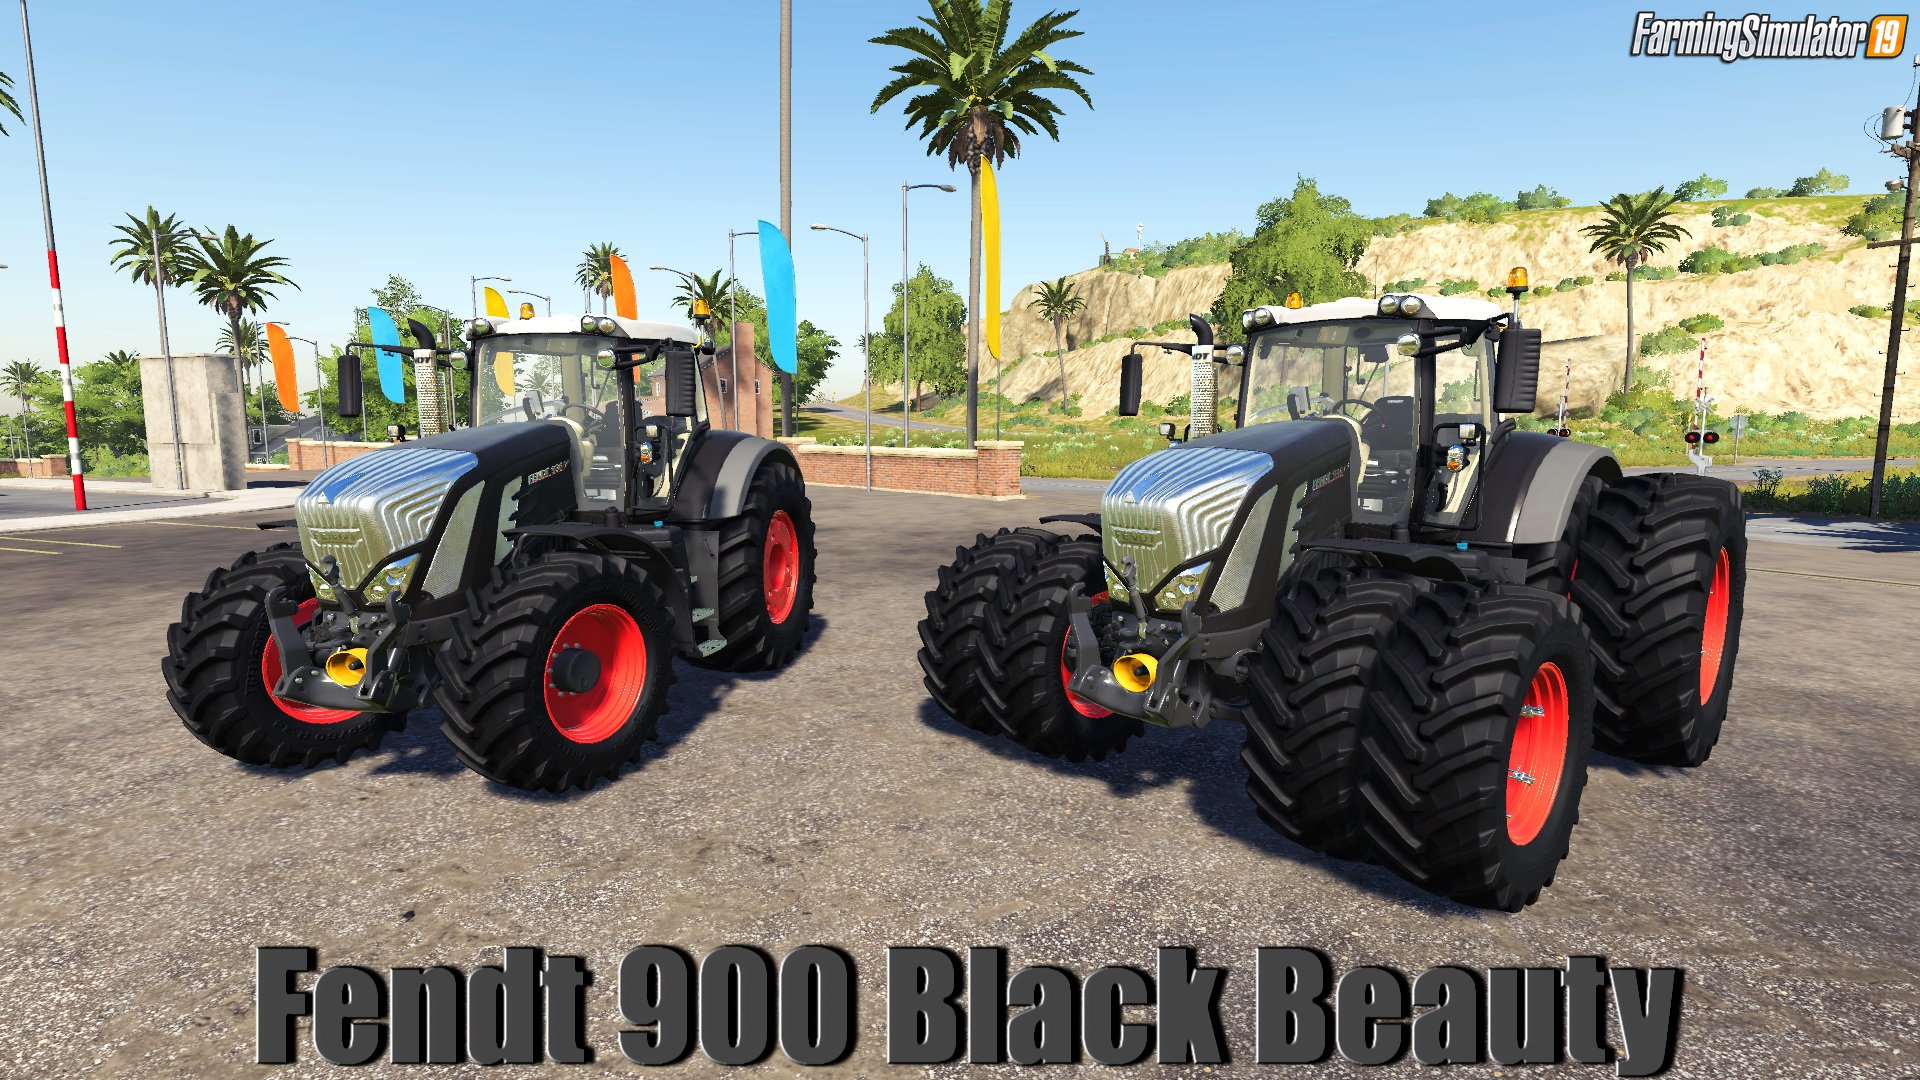 Tractor Fendt 900 Black Beauty v1.0 by GIANTS Software for FS19